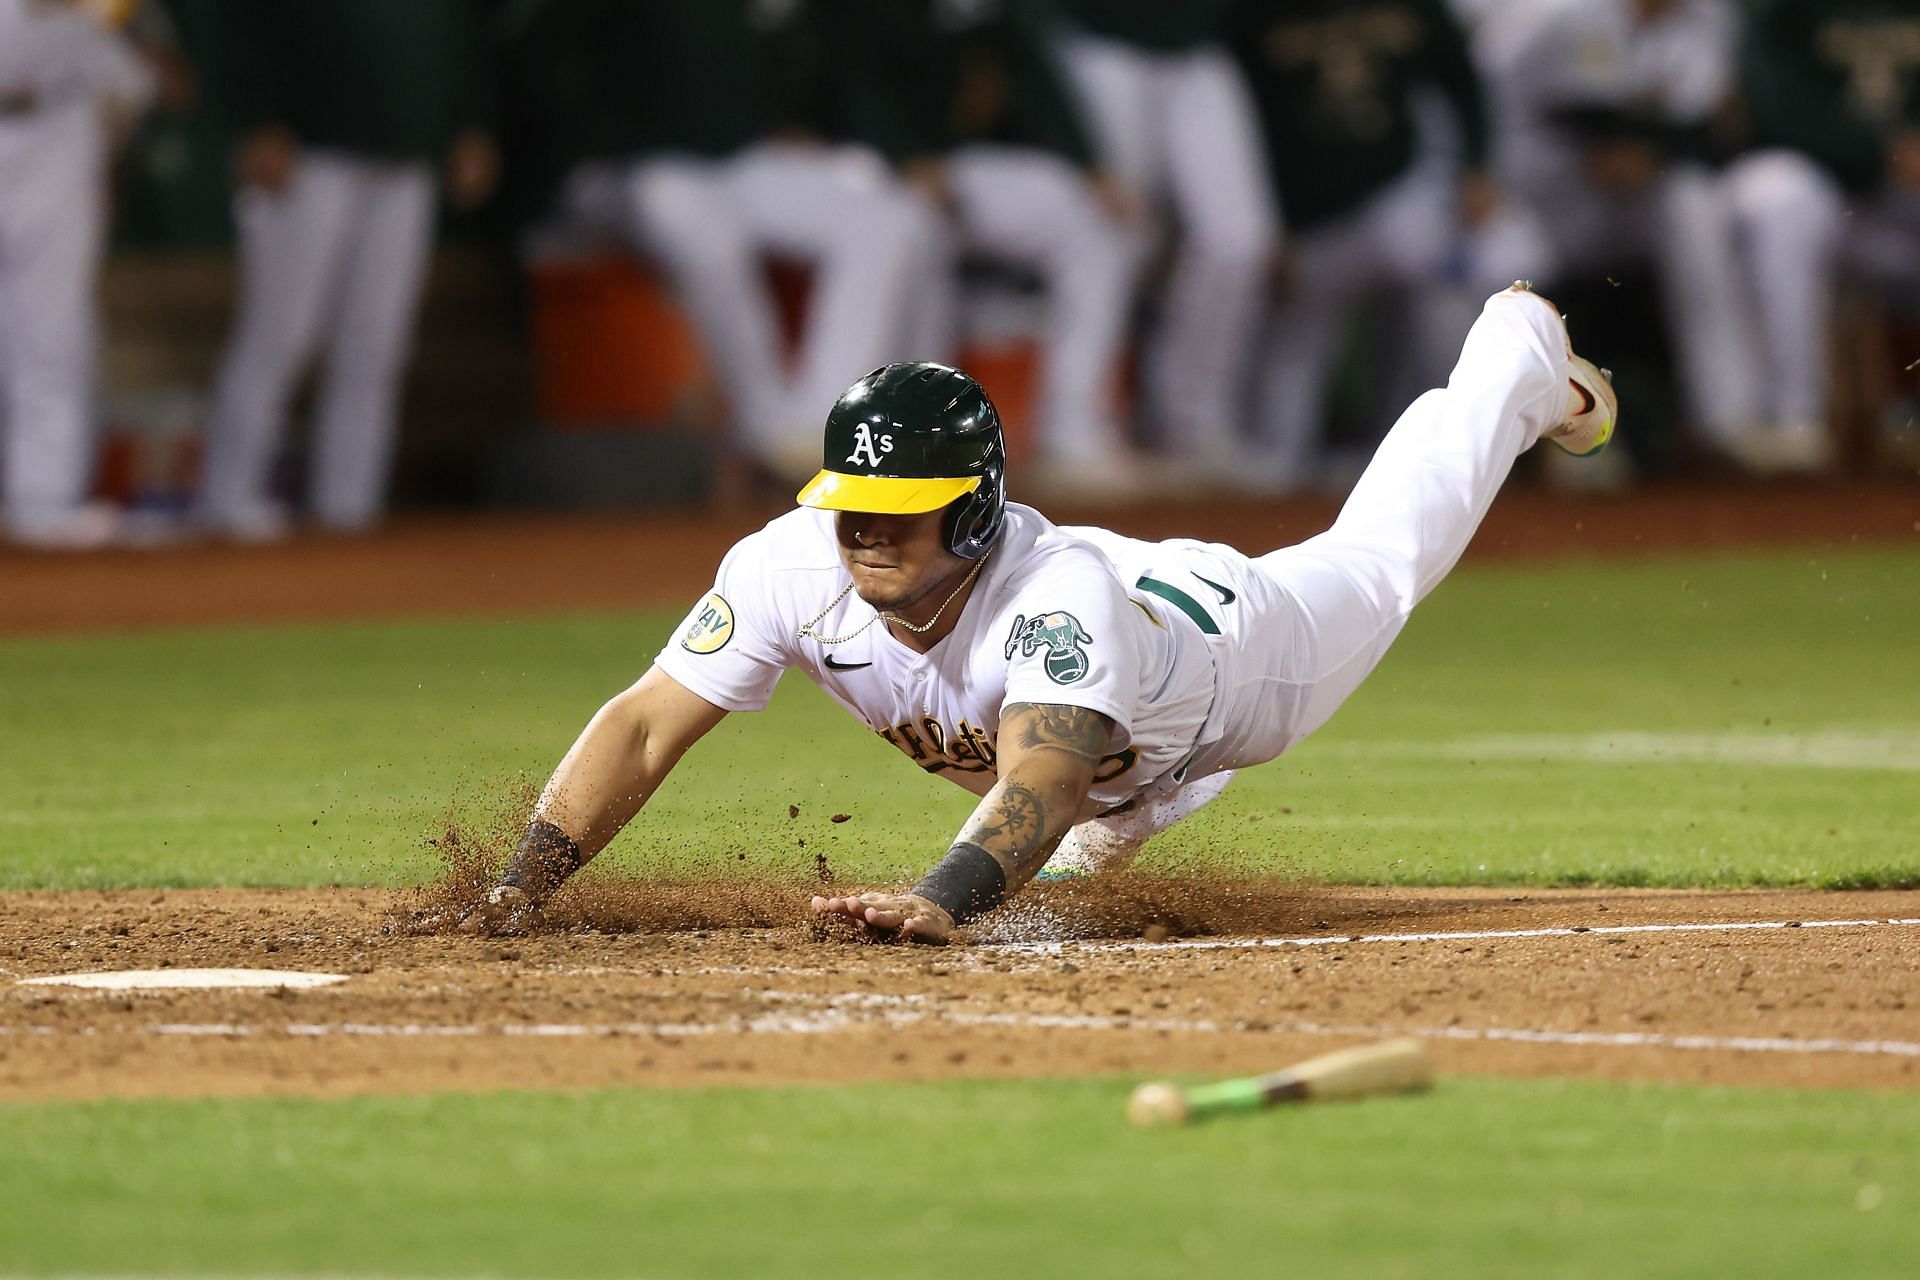 Jordan Diaz #75 of the Oakland Athletics slides into home plate against the Seattle Mariners